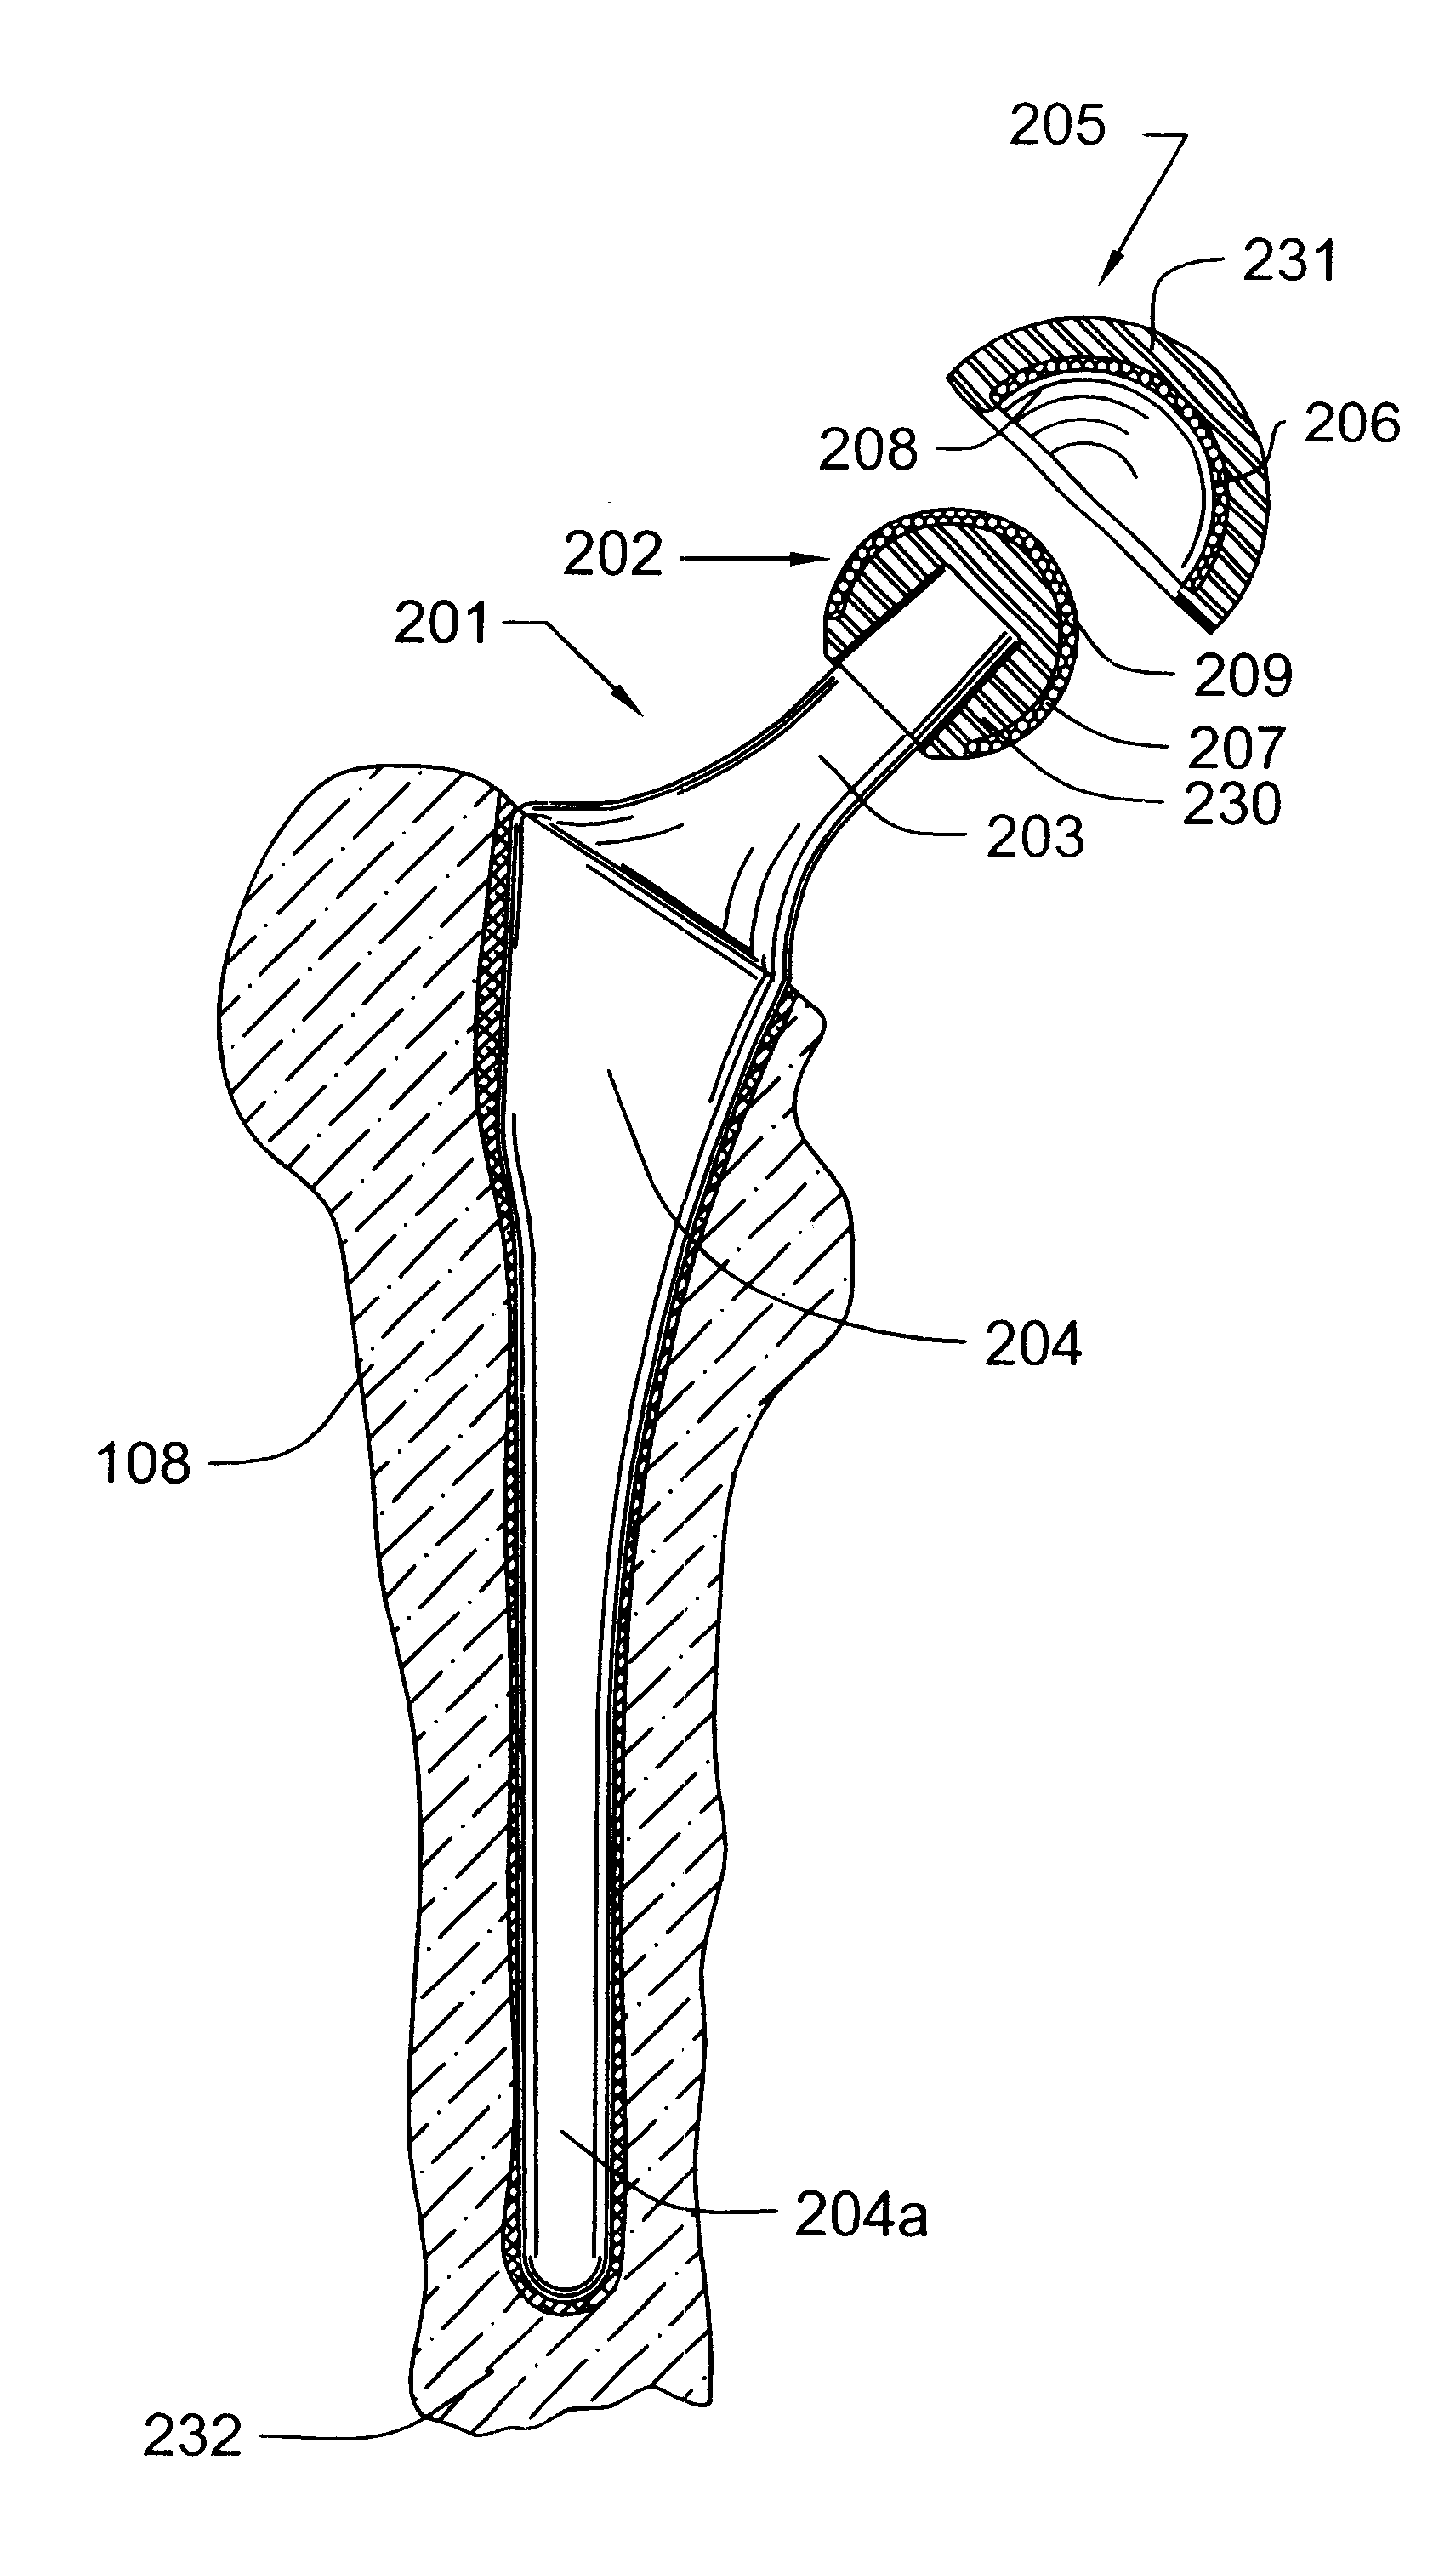 Prosthetic hip joint having at least one sintered polycrystalline diamond compact articulation surface and substrate surface topographical features in said polycrystalline diamond compact